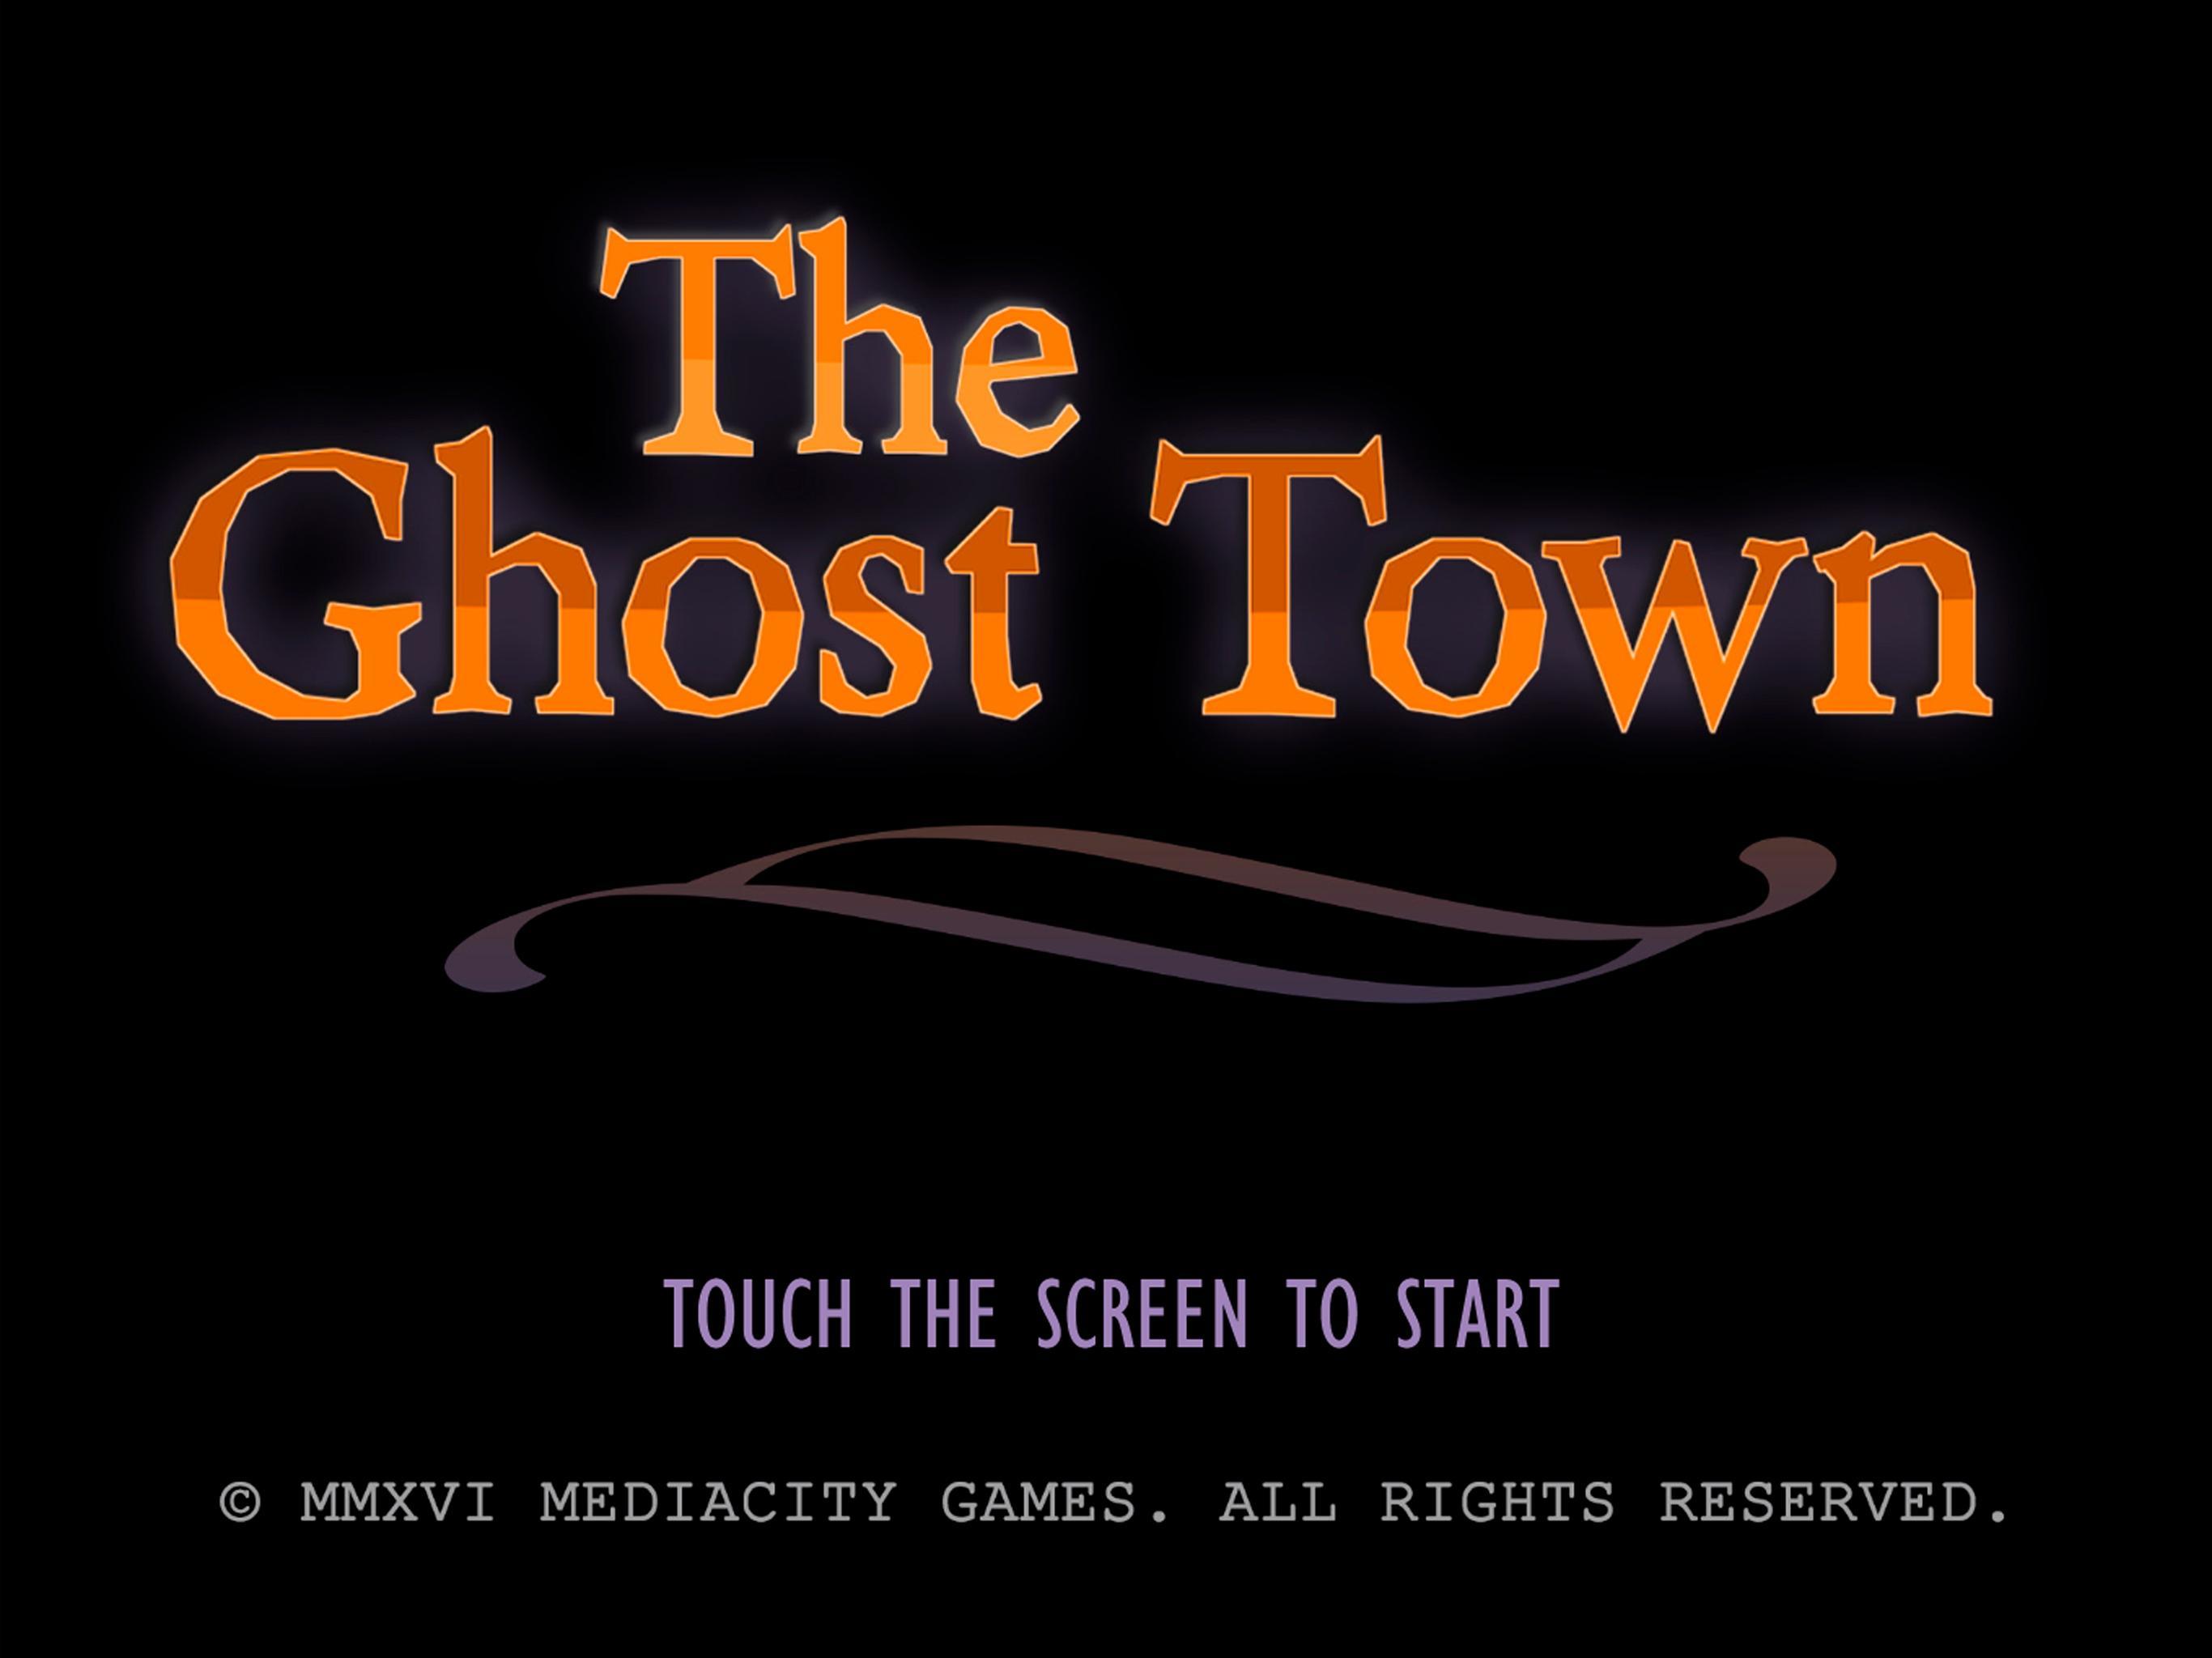 The Ghost Town screenshot game